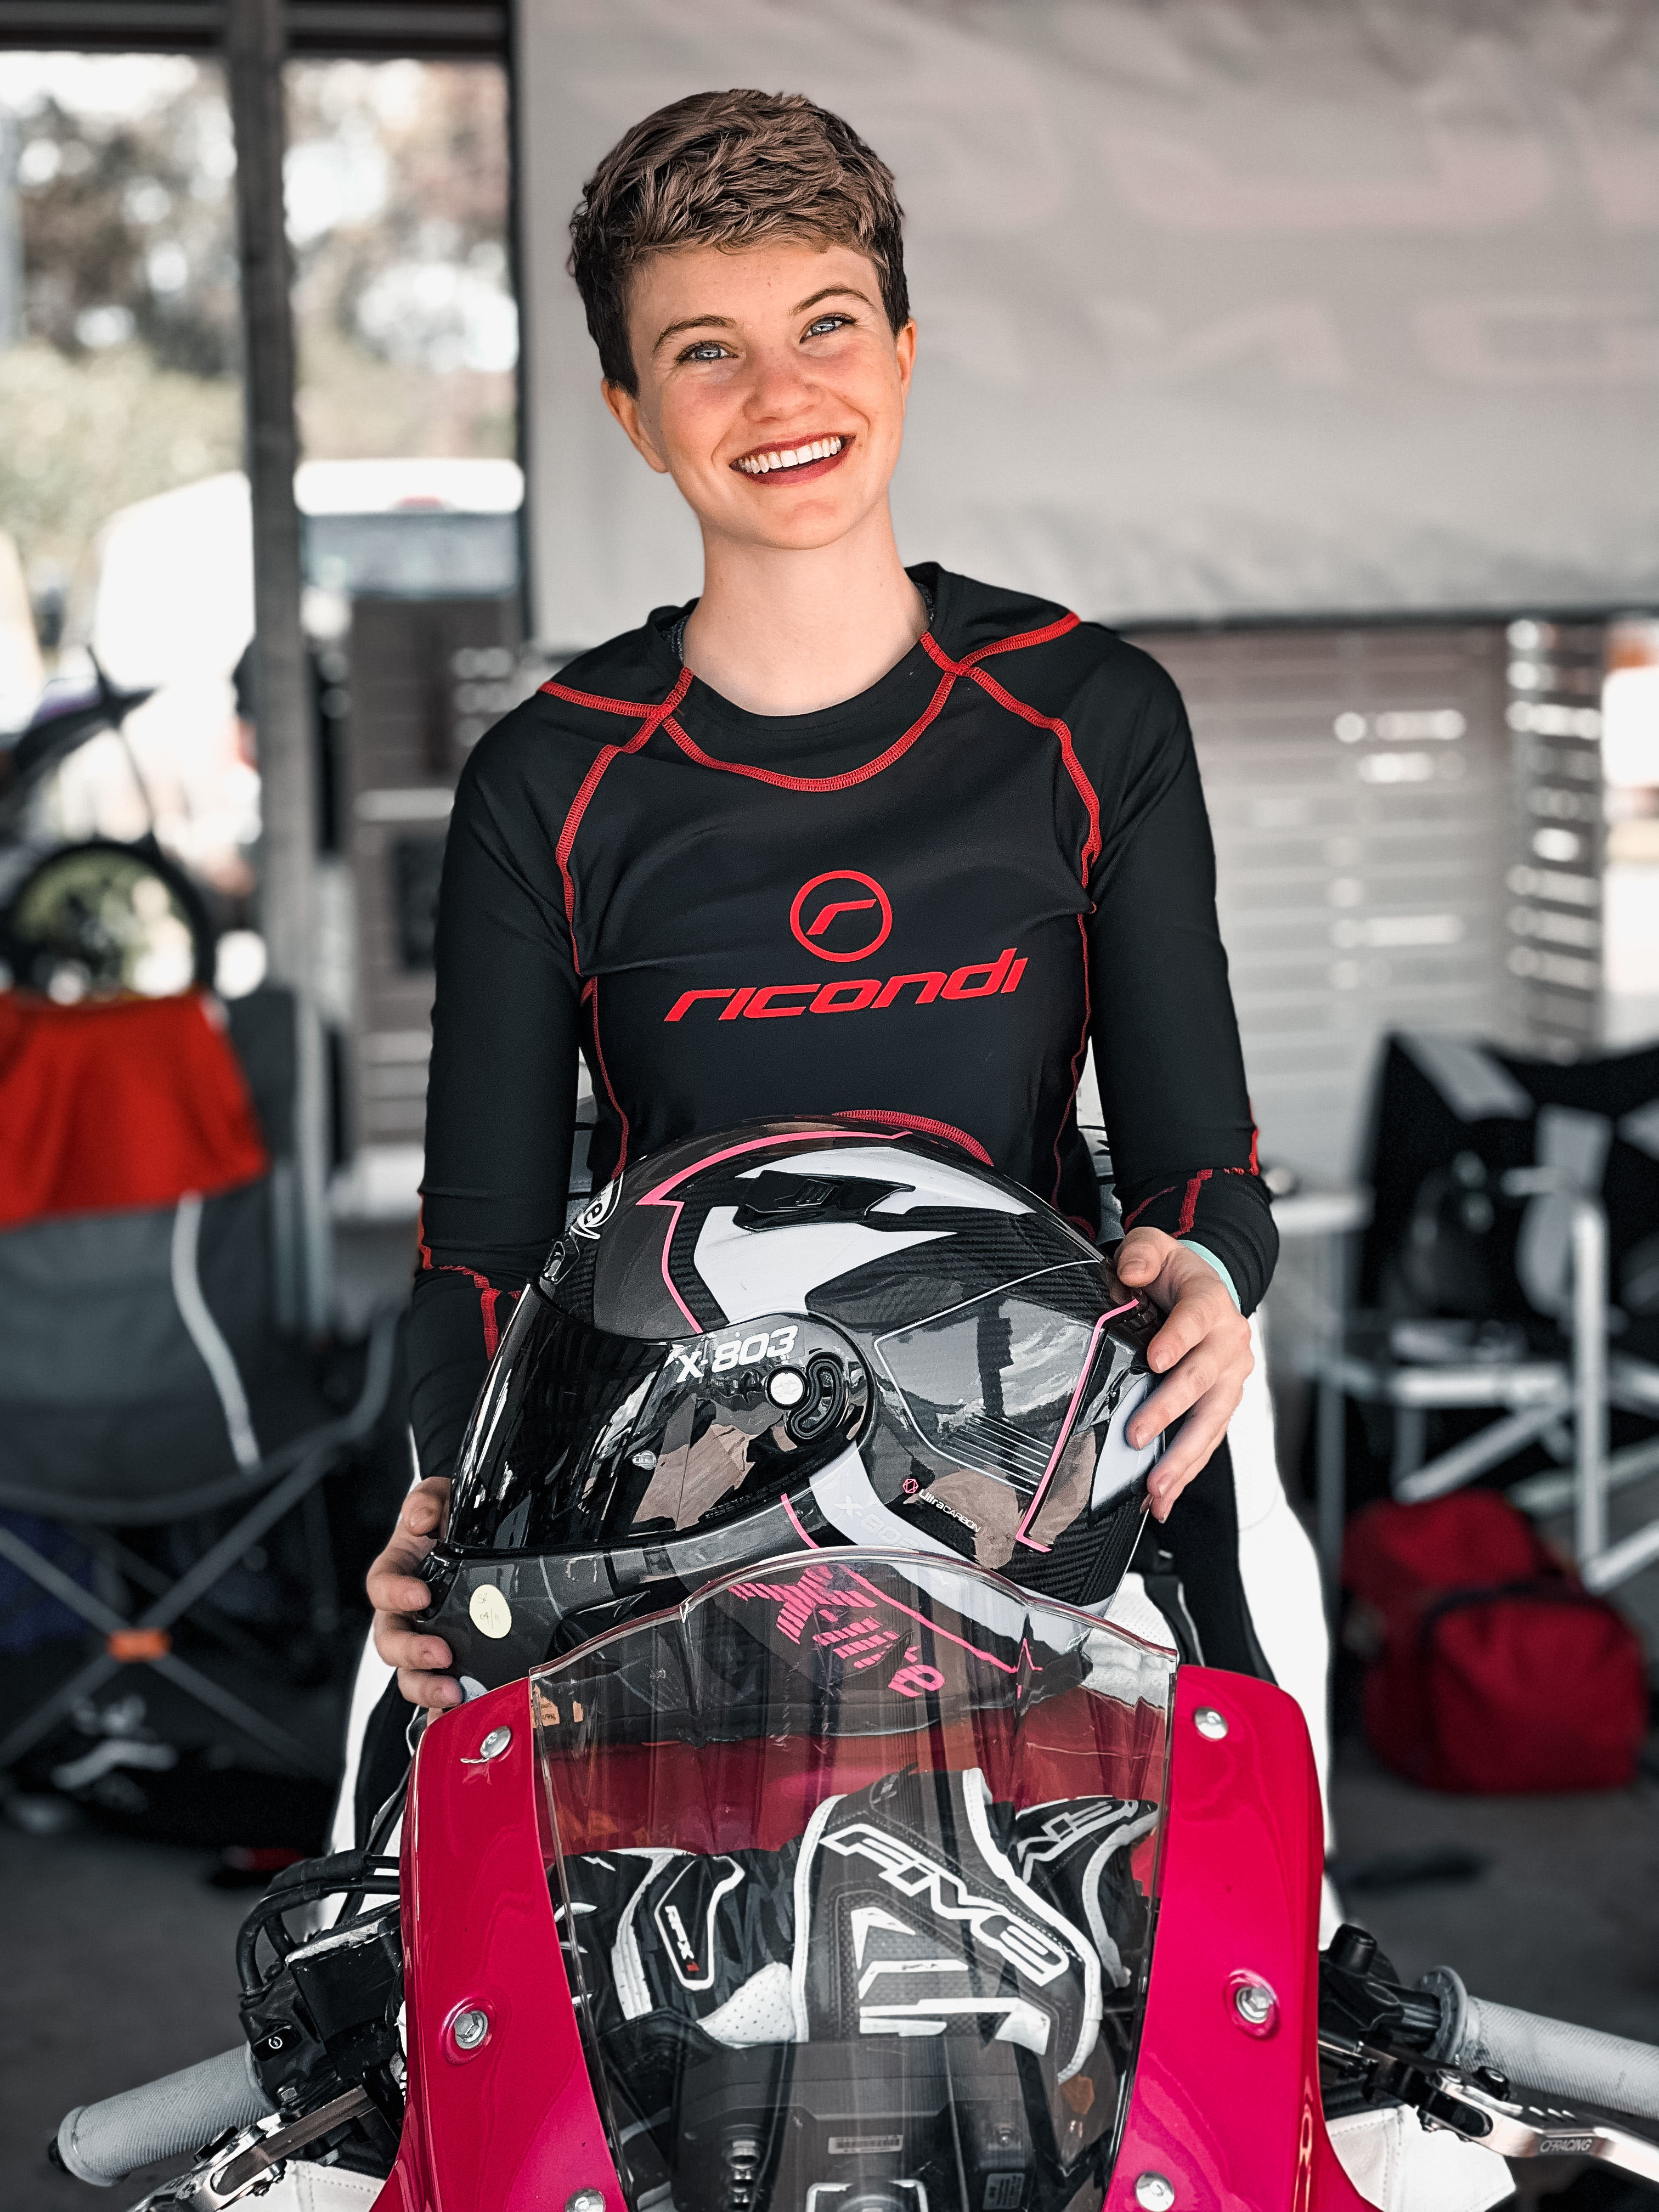 a young woman with short hair sits on a motorbike smiling, holding a black helmet